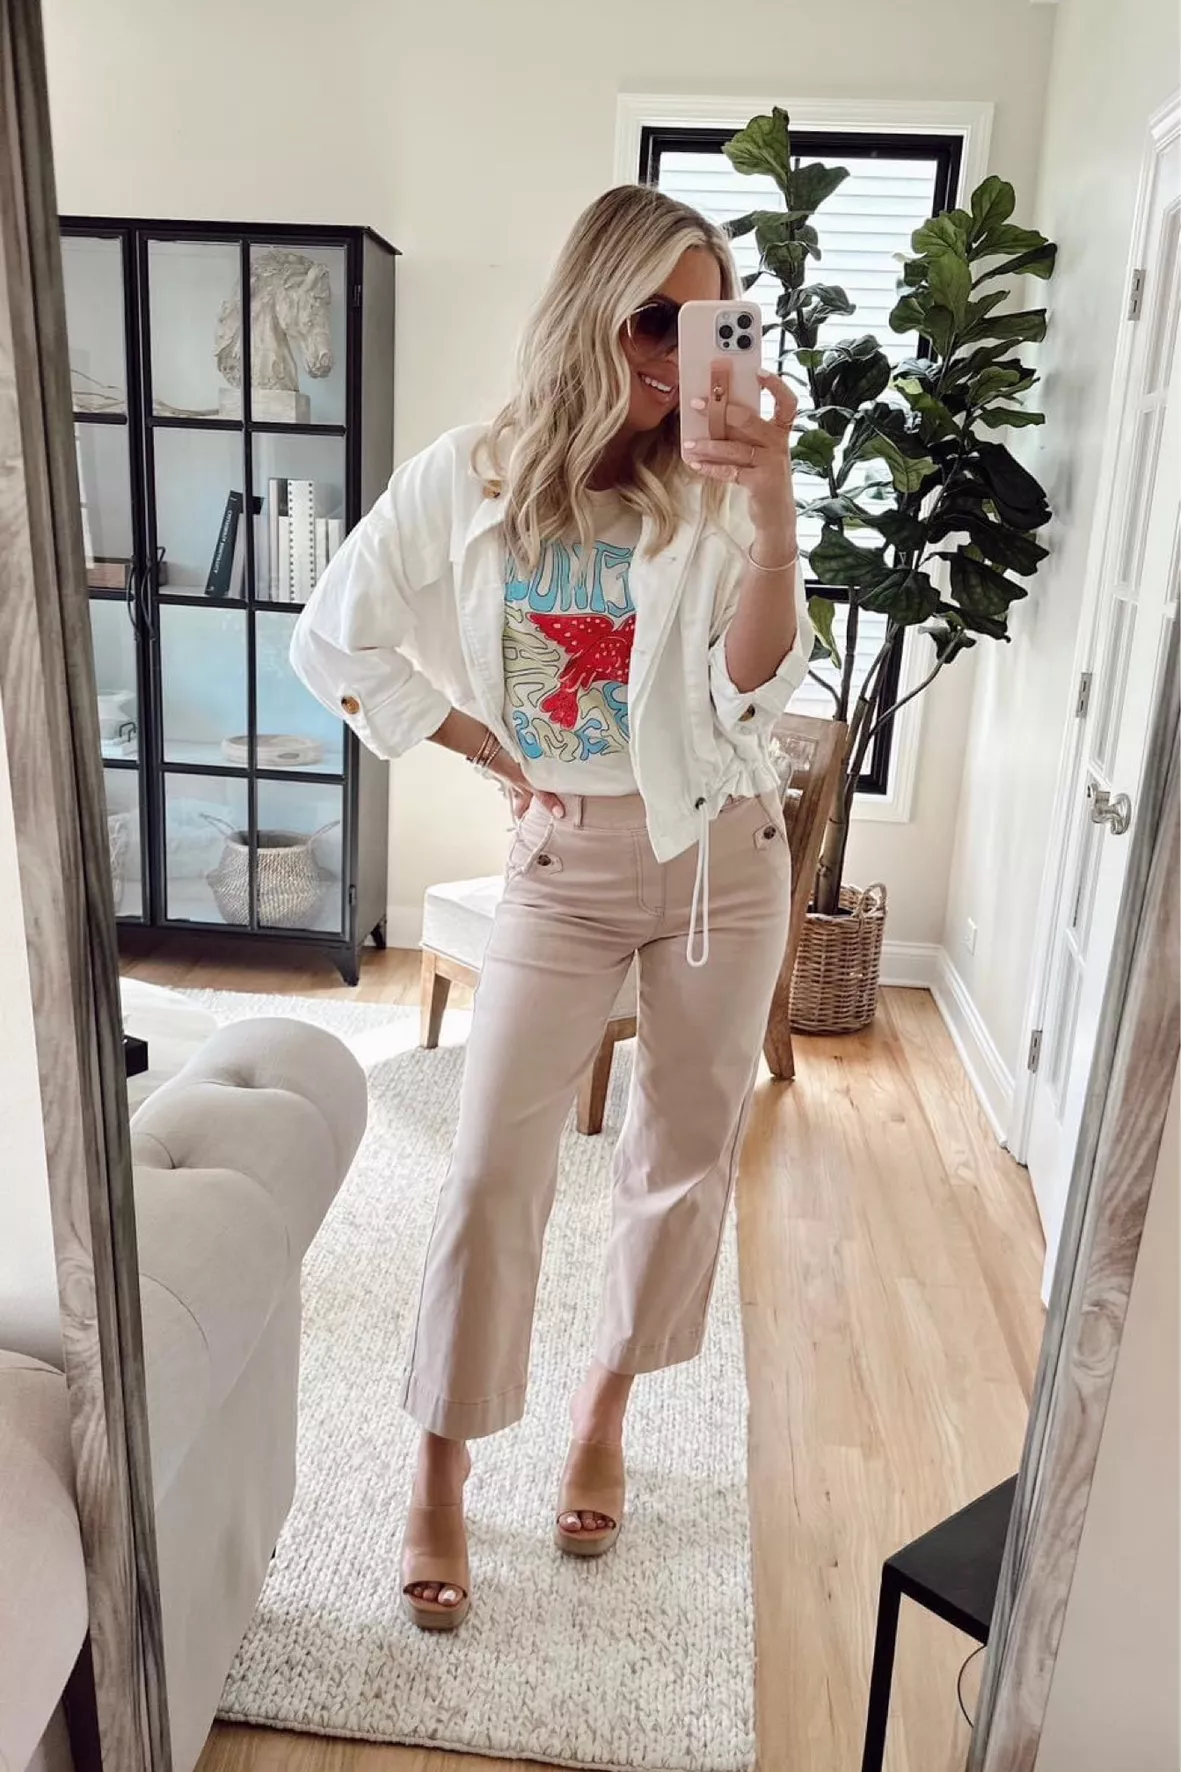 Spanx's Wide-Leg Jeans Are So Comfy and Flattering